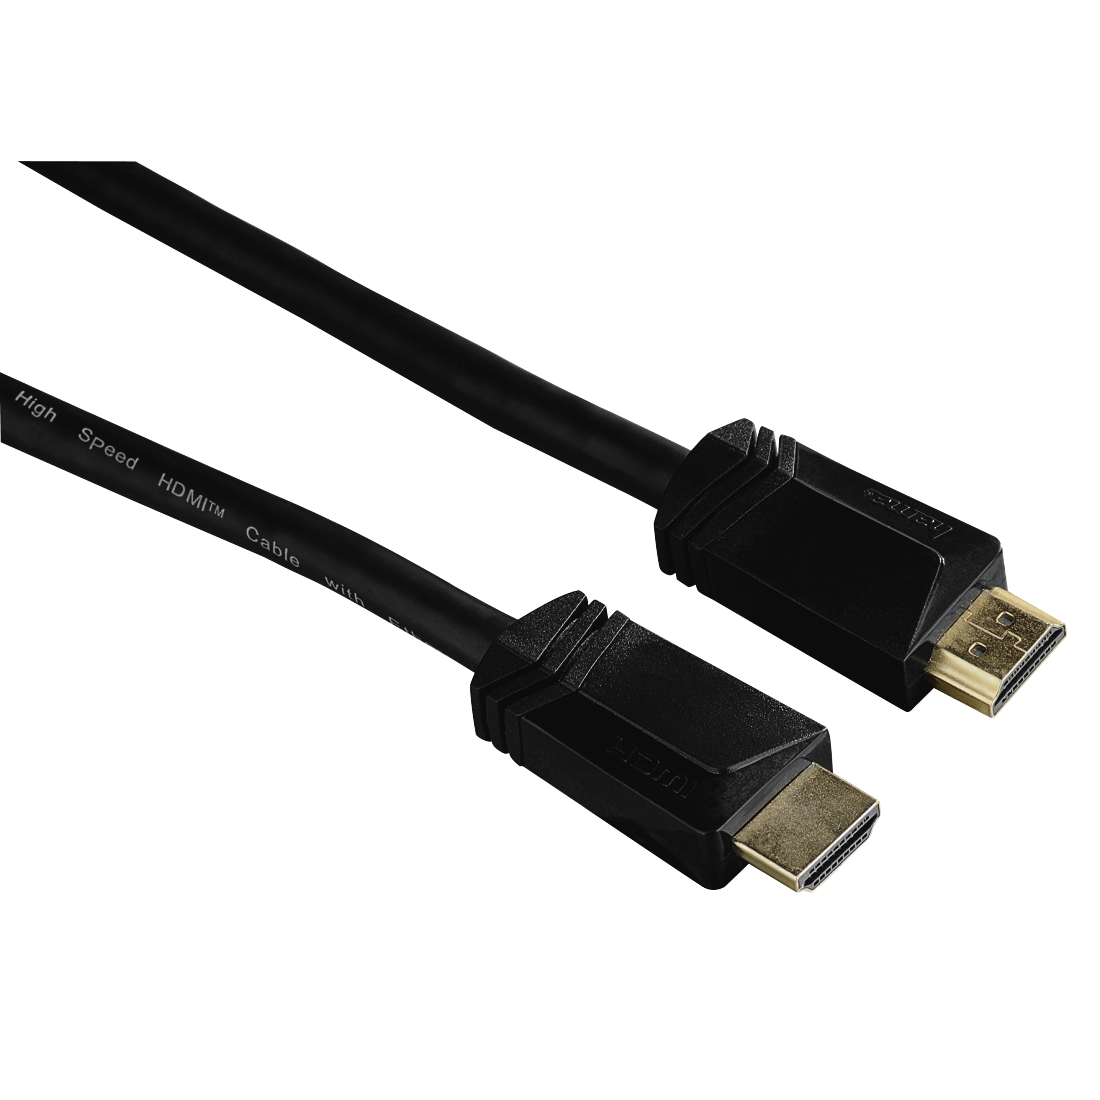 00122105 Hama High Speed HDMI™ Cable, plug - plug, Ethernet, gold-plated,  3.0 m